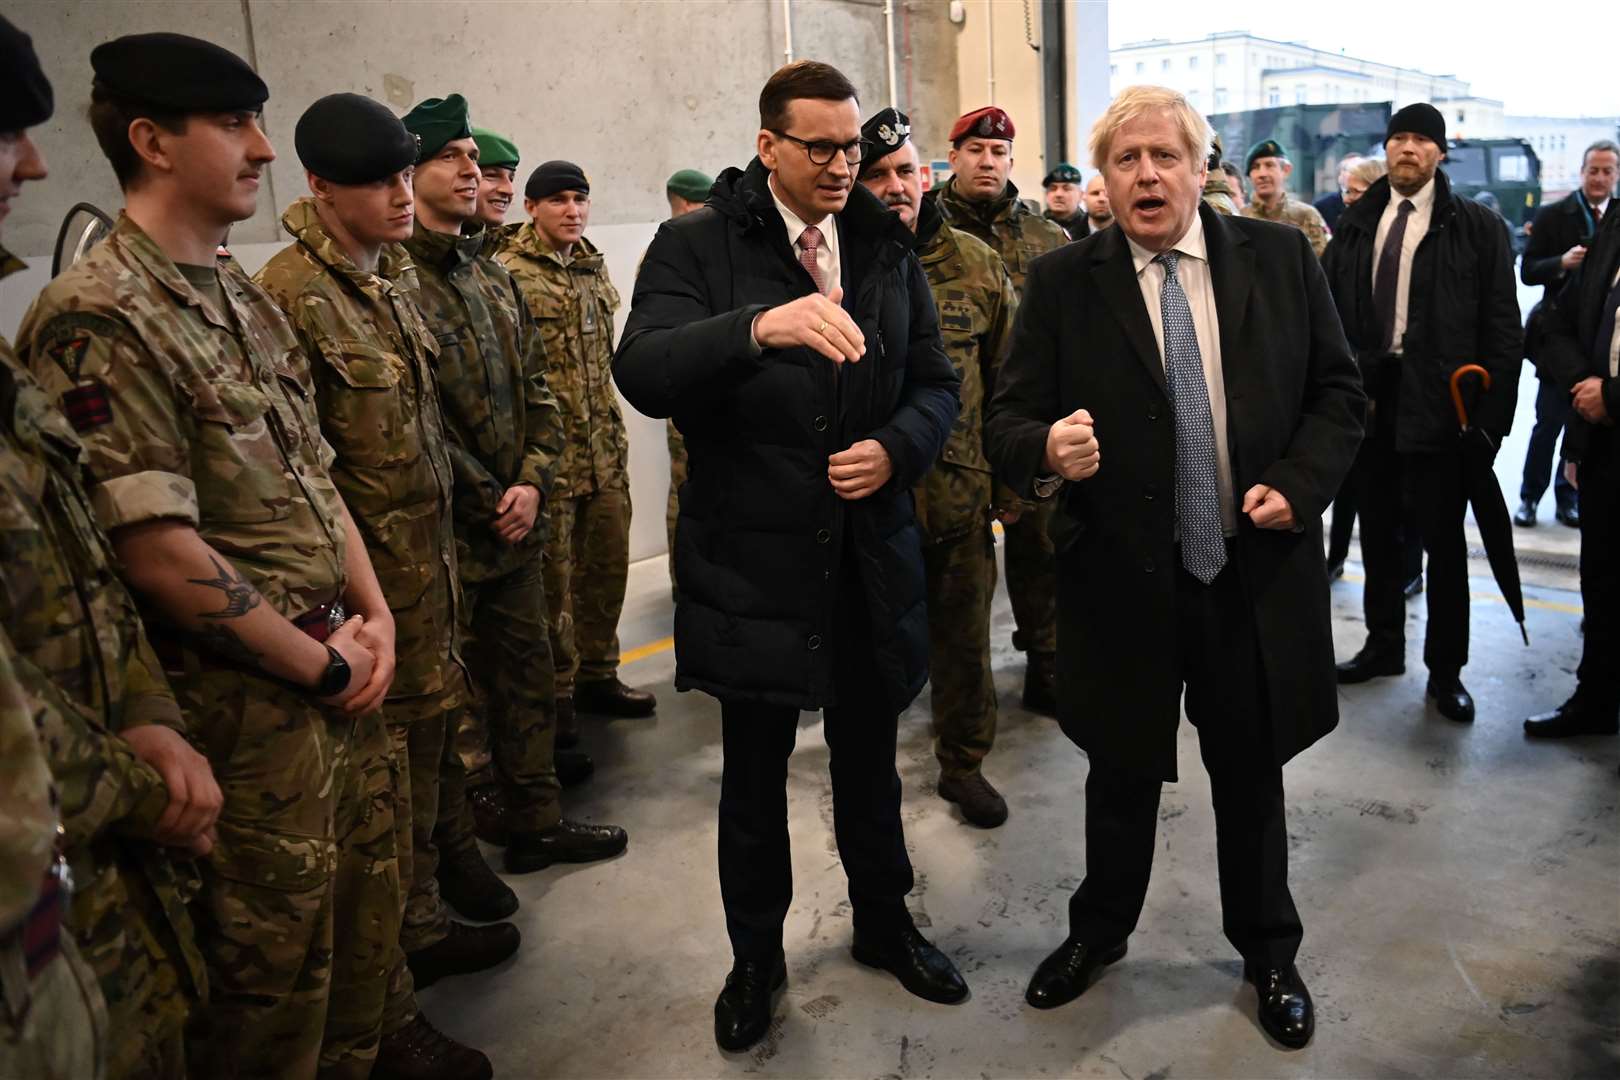 Boris Johnson gestures as he speaks to British troops during a visit with Polish Prime Minister Mateusz Morawiecki to a military base in Warsaw (Daniel Leal/PA)